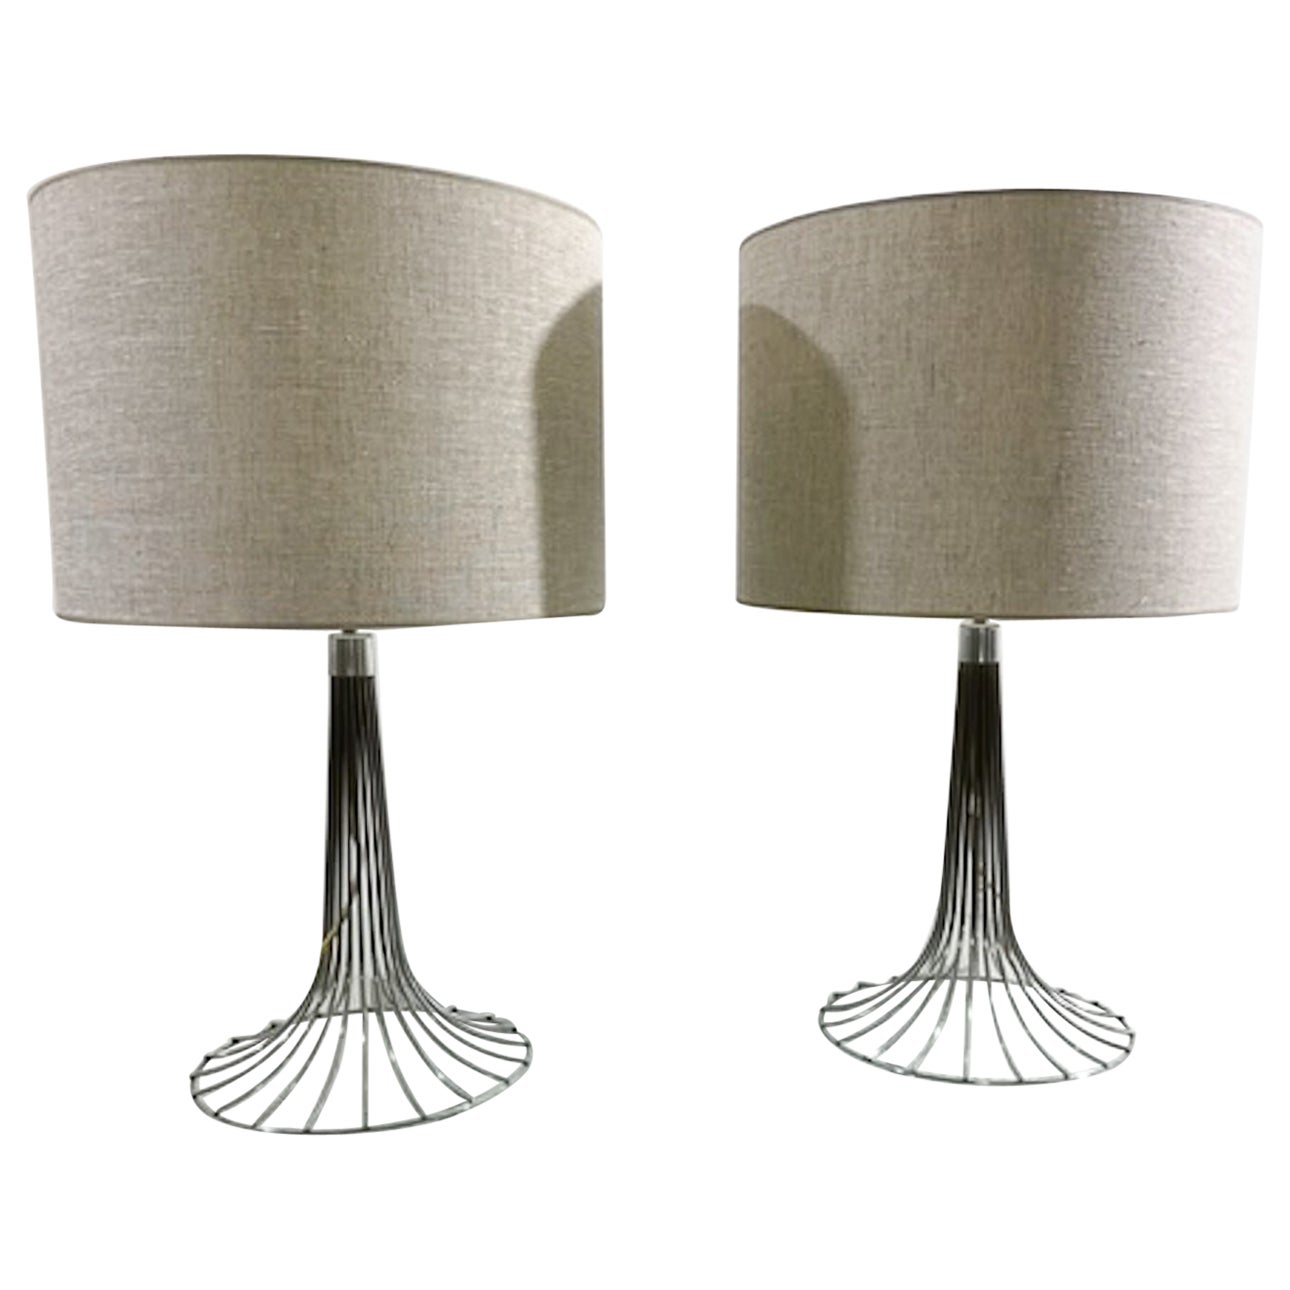 Mid-Century Modern Space Age Pair of Chrome Table Lamps, 1970s